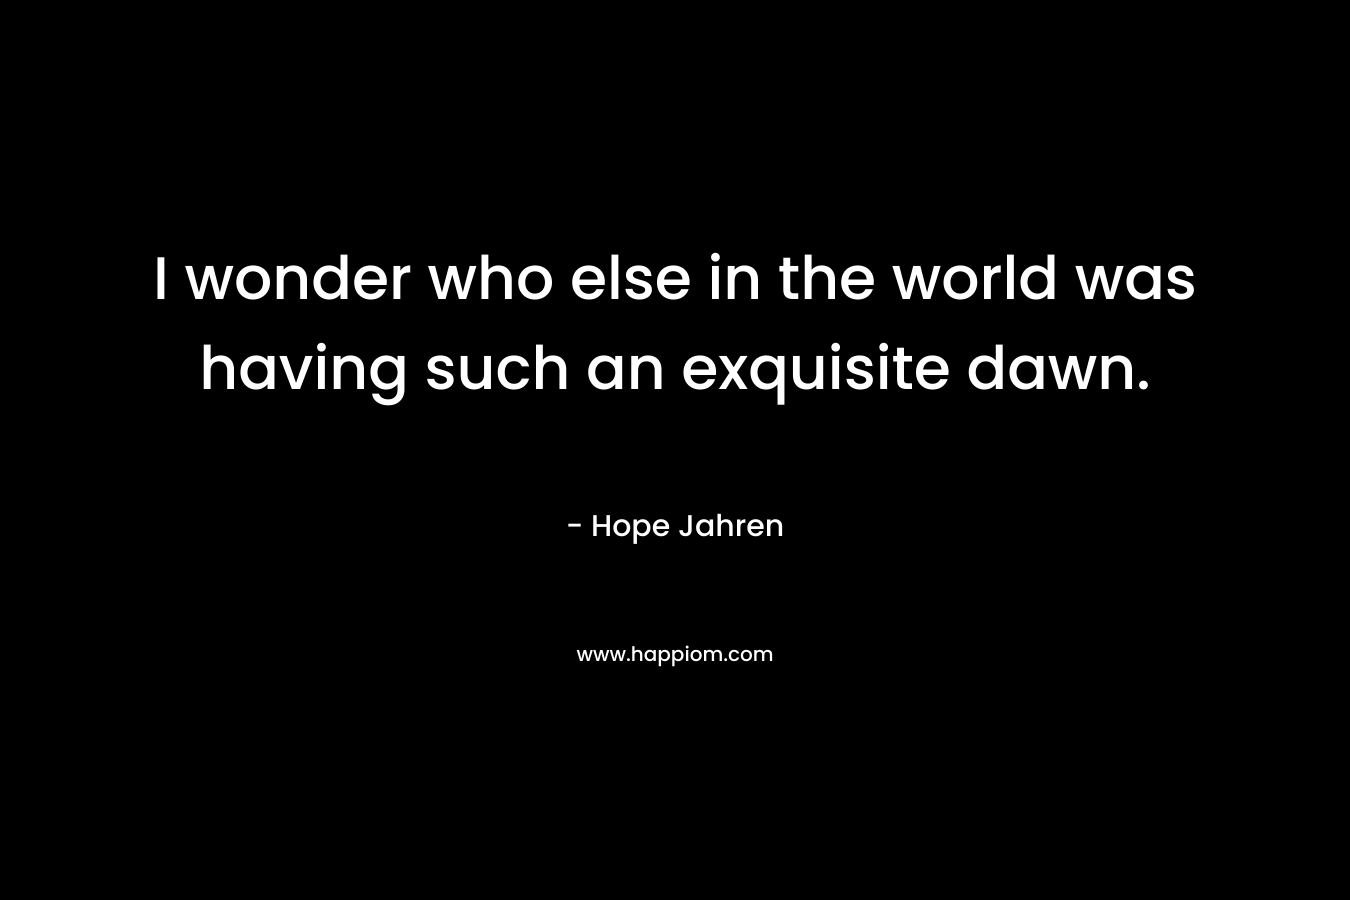 I wonder who else in the world was having such an exquisite dawn. – Hope Jahren